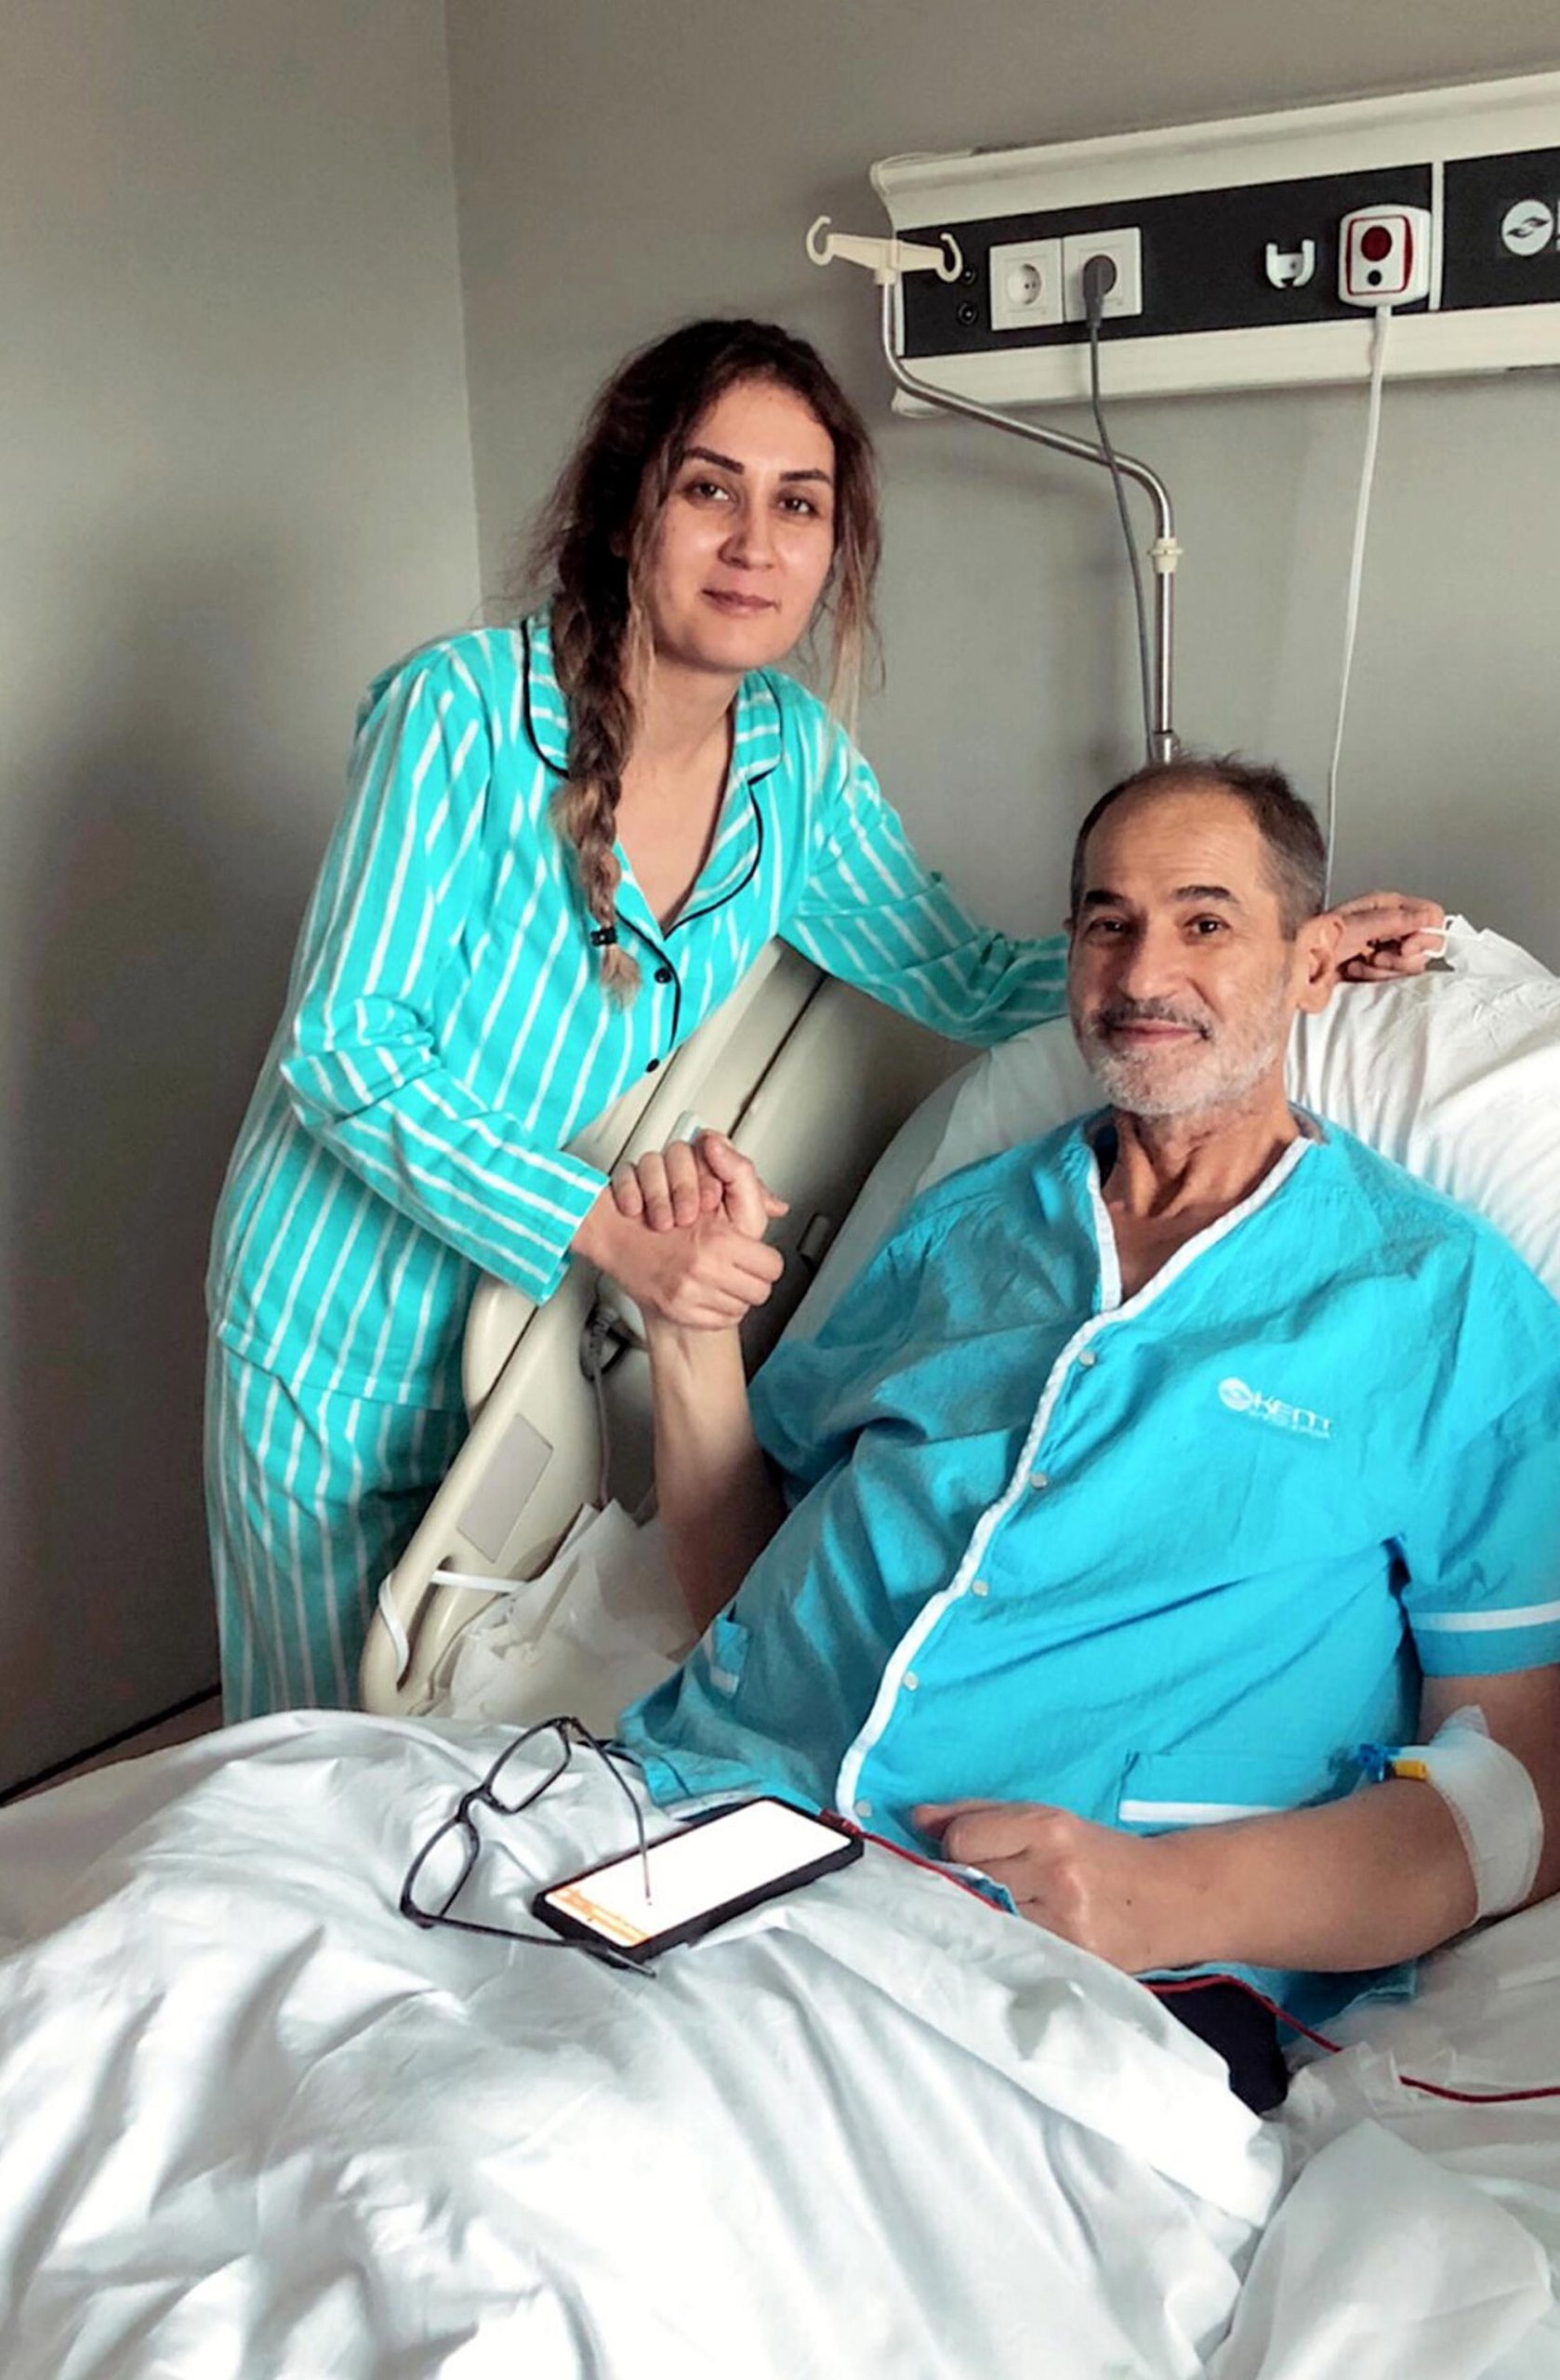 Read more about the article Wife Gives Husband Best Valentines Gift Ever With Life-Saving Organ Donation